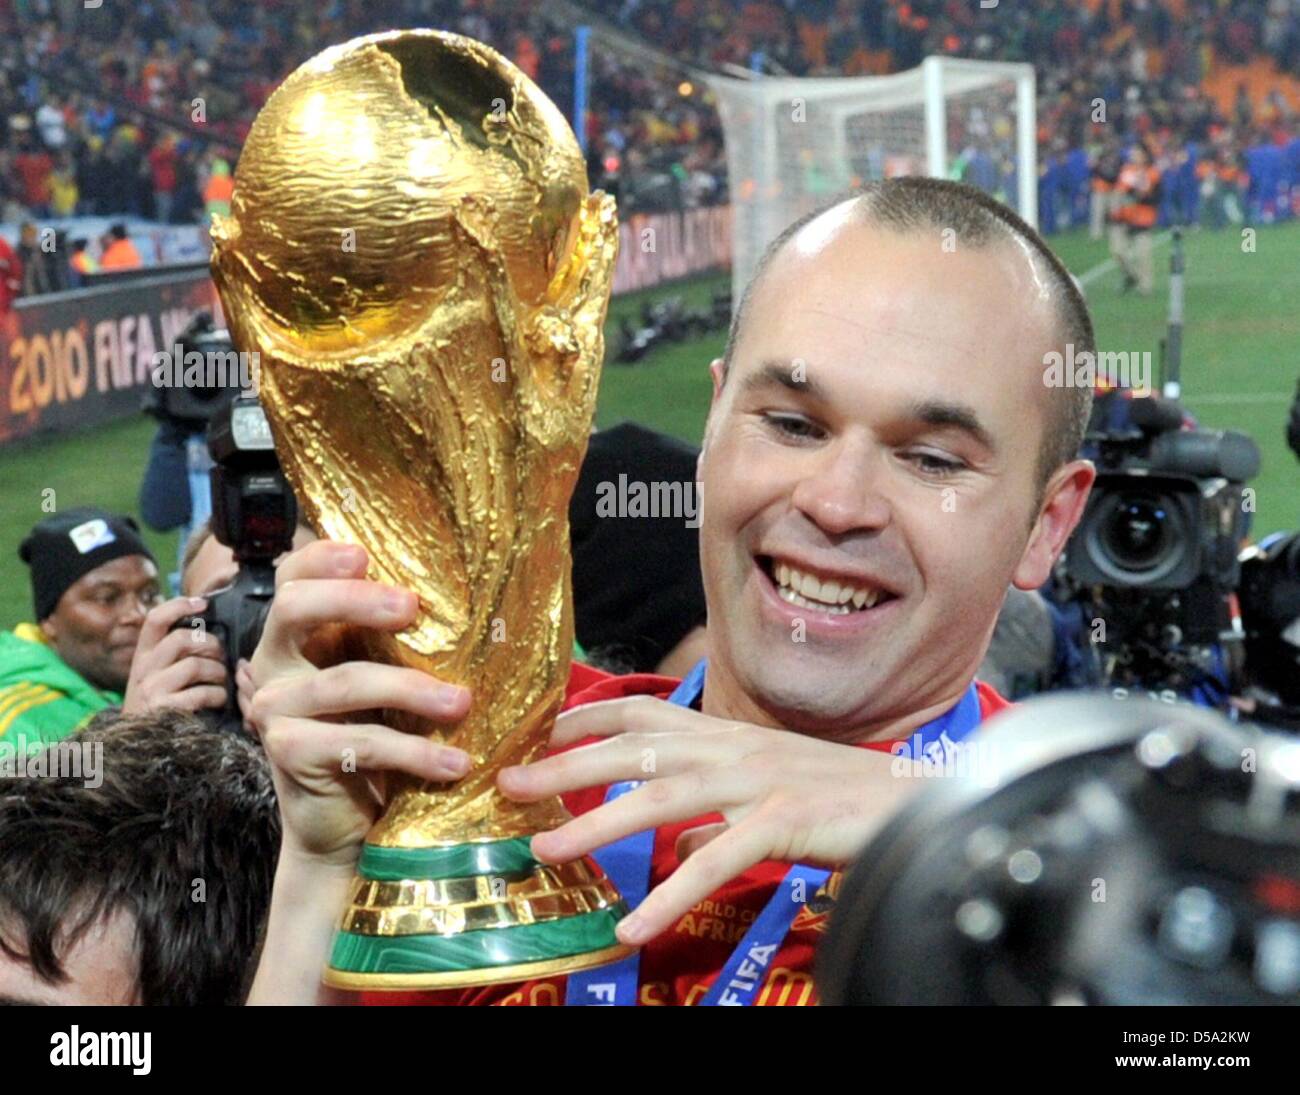 Andres Iniesta of Spain celebrates with the trophy after the 2010 FIFA World Cup final match between the Netherlands and Spain at the Soccer City Stadium in Johannesburg, South Africa 11 July 2010. Photo: Bernd Weissbrod dpa - Please refer to http://dpaq.de/FIFA-WM2010-TC  +++(c) dpa - Bildfunk+++ Stock Photo